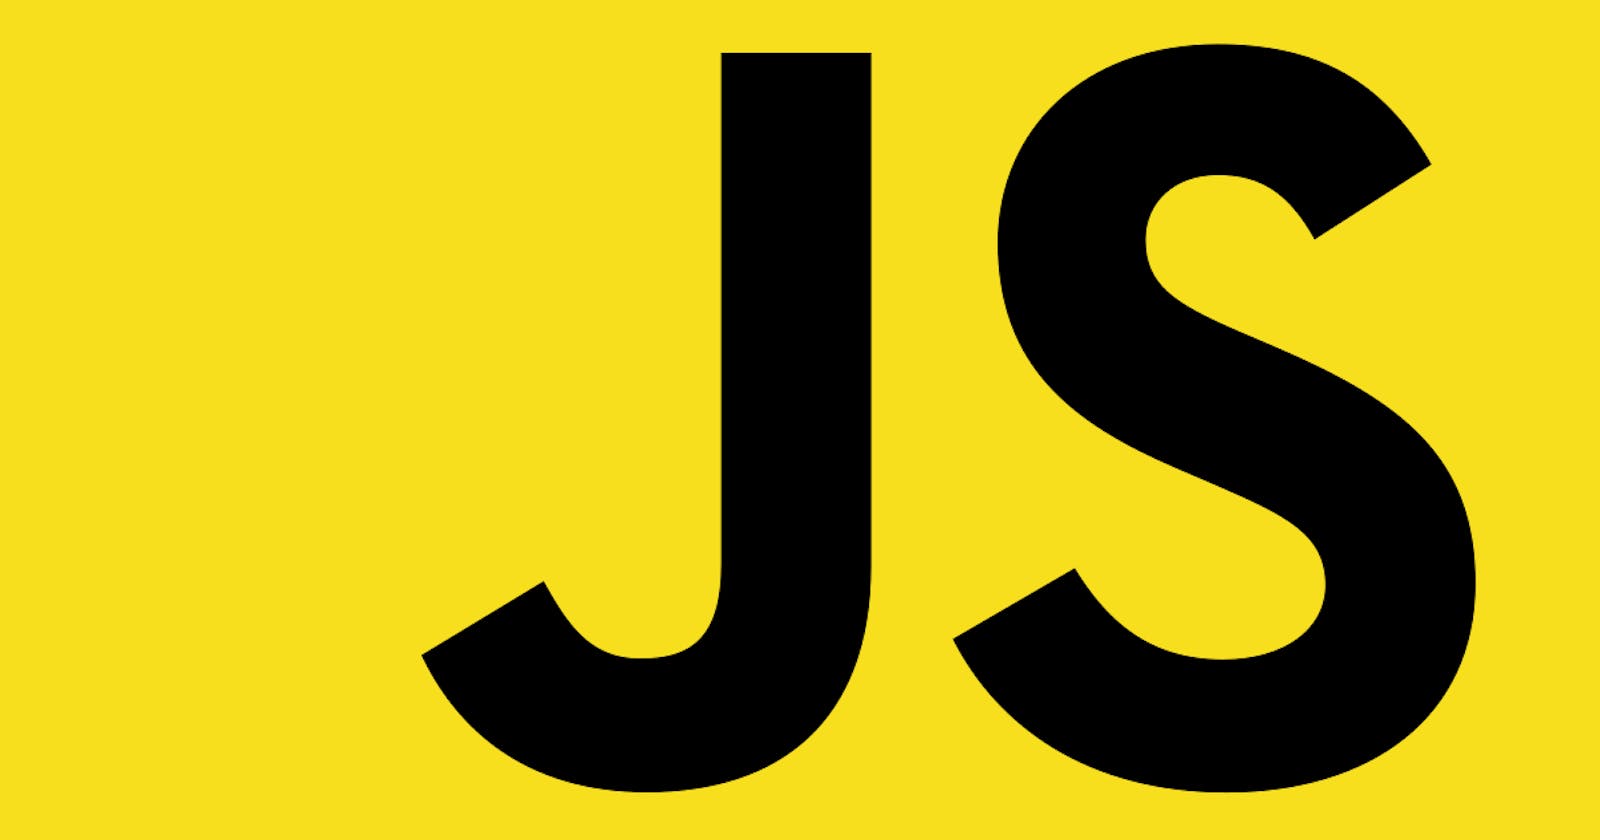 JavaScript: A Full Introduction